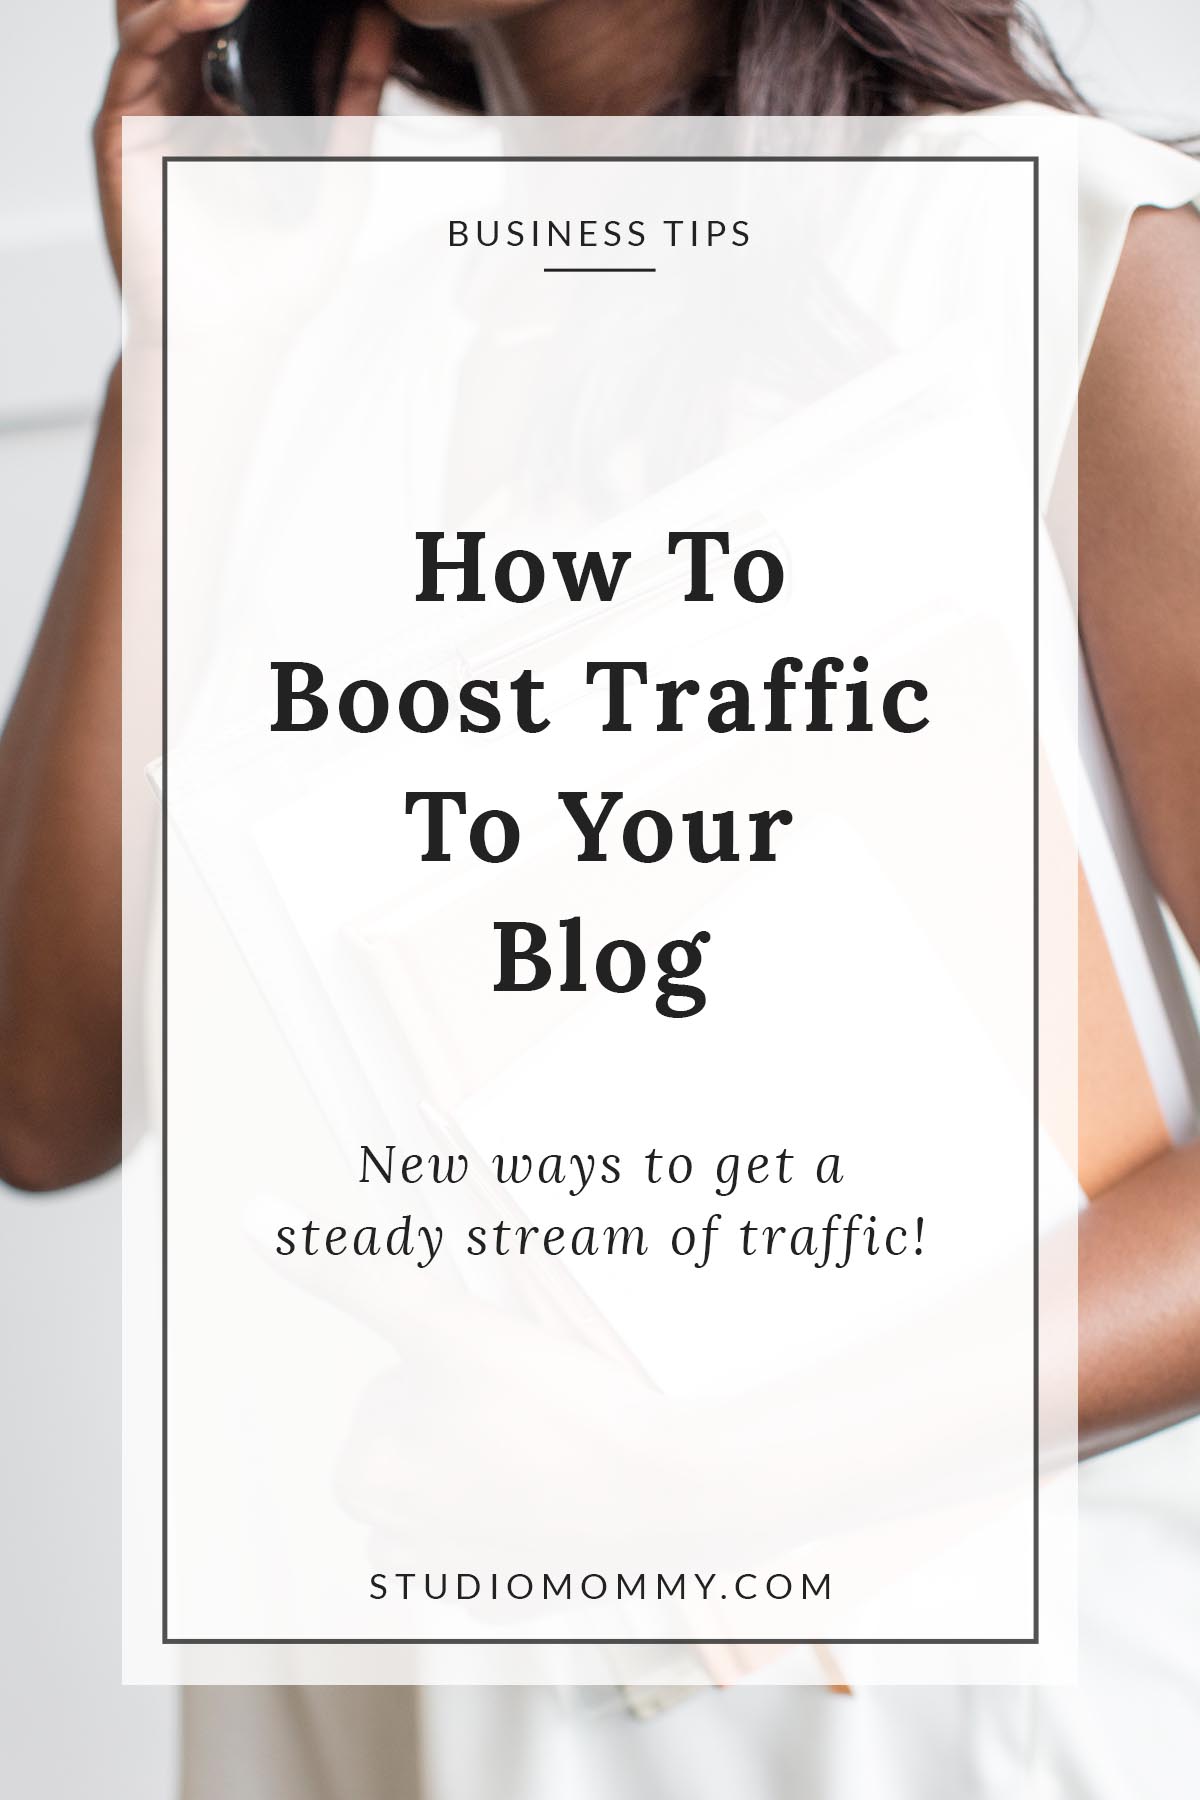 Ho to Boost Traffic to Your Blog